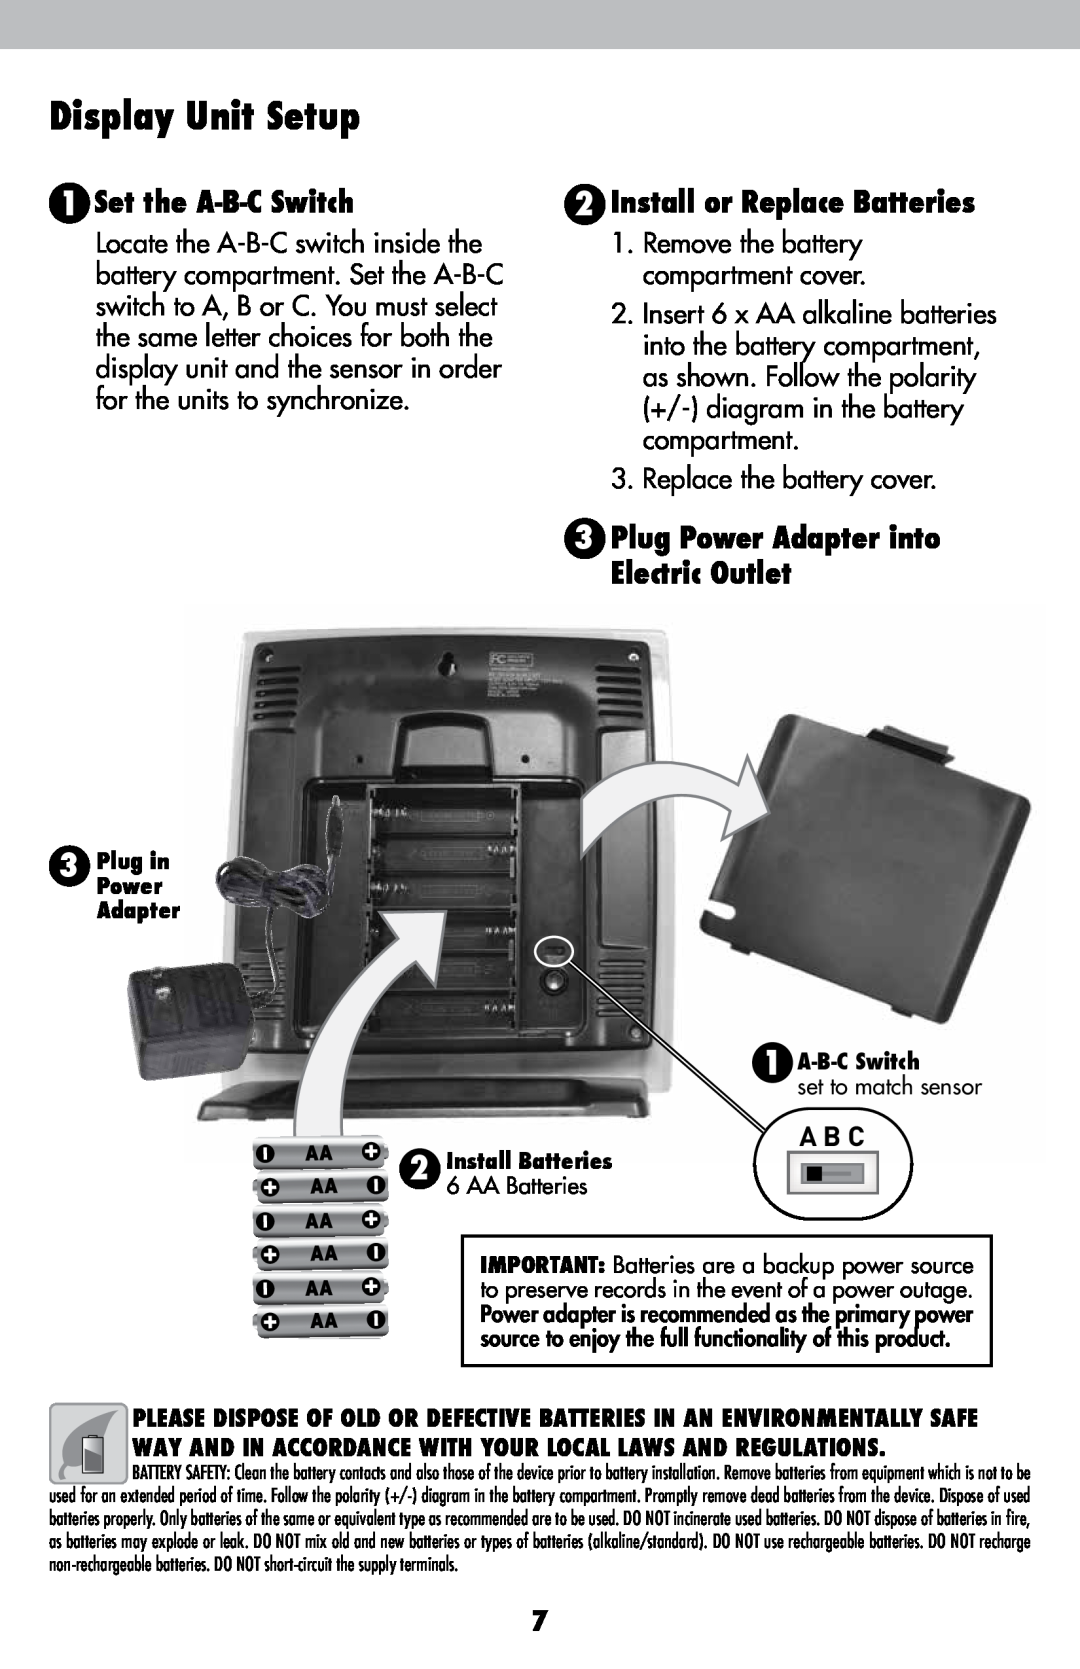 Acu-Rite 622 instruction manual Display Unit Setup, Plug Power Adapter into Electric Outlet, Set the A-B-C Switch, A B C 